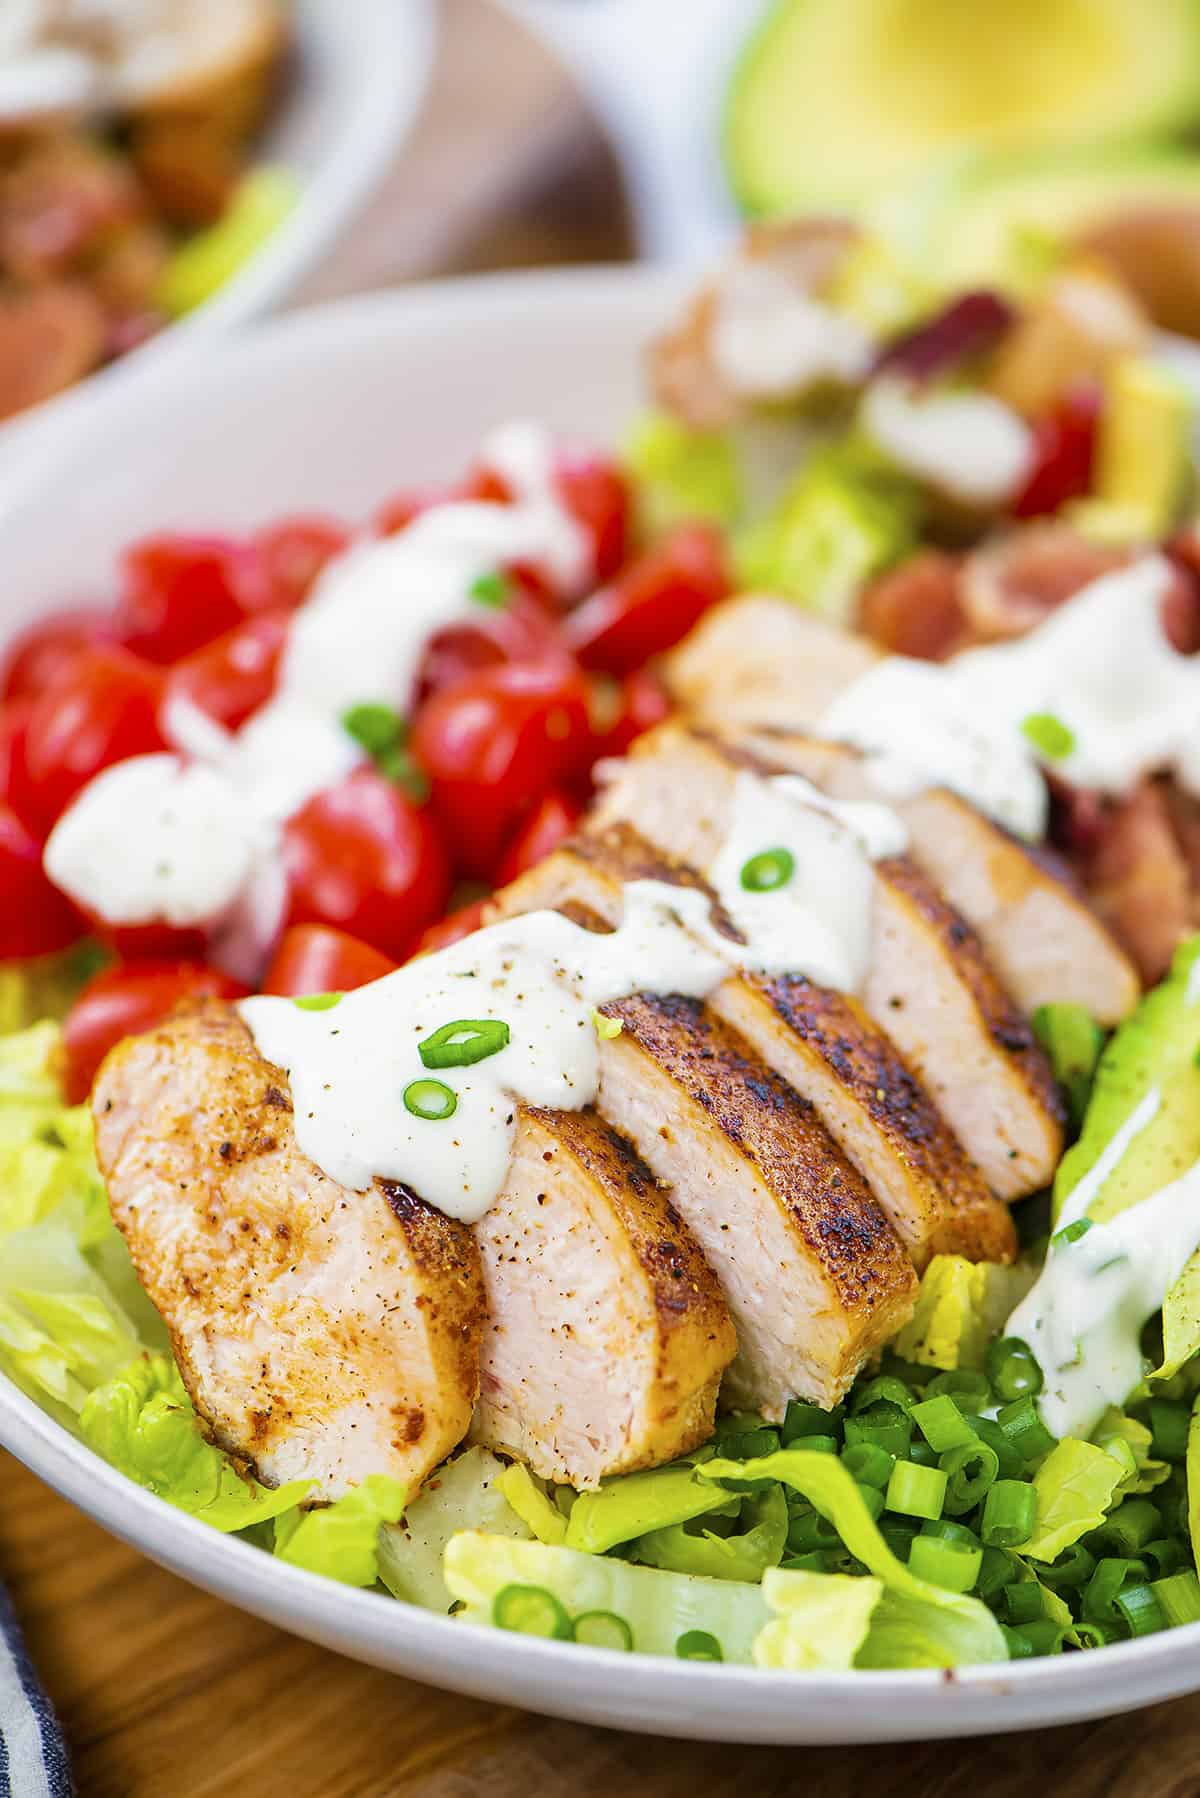 Sliced chicken on salad topped with ranch dressing.